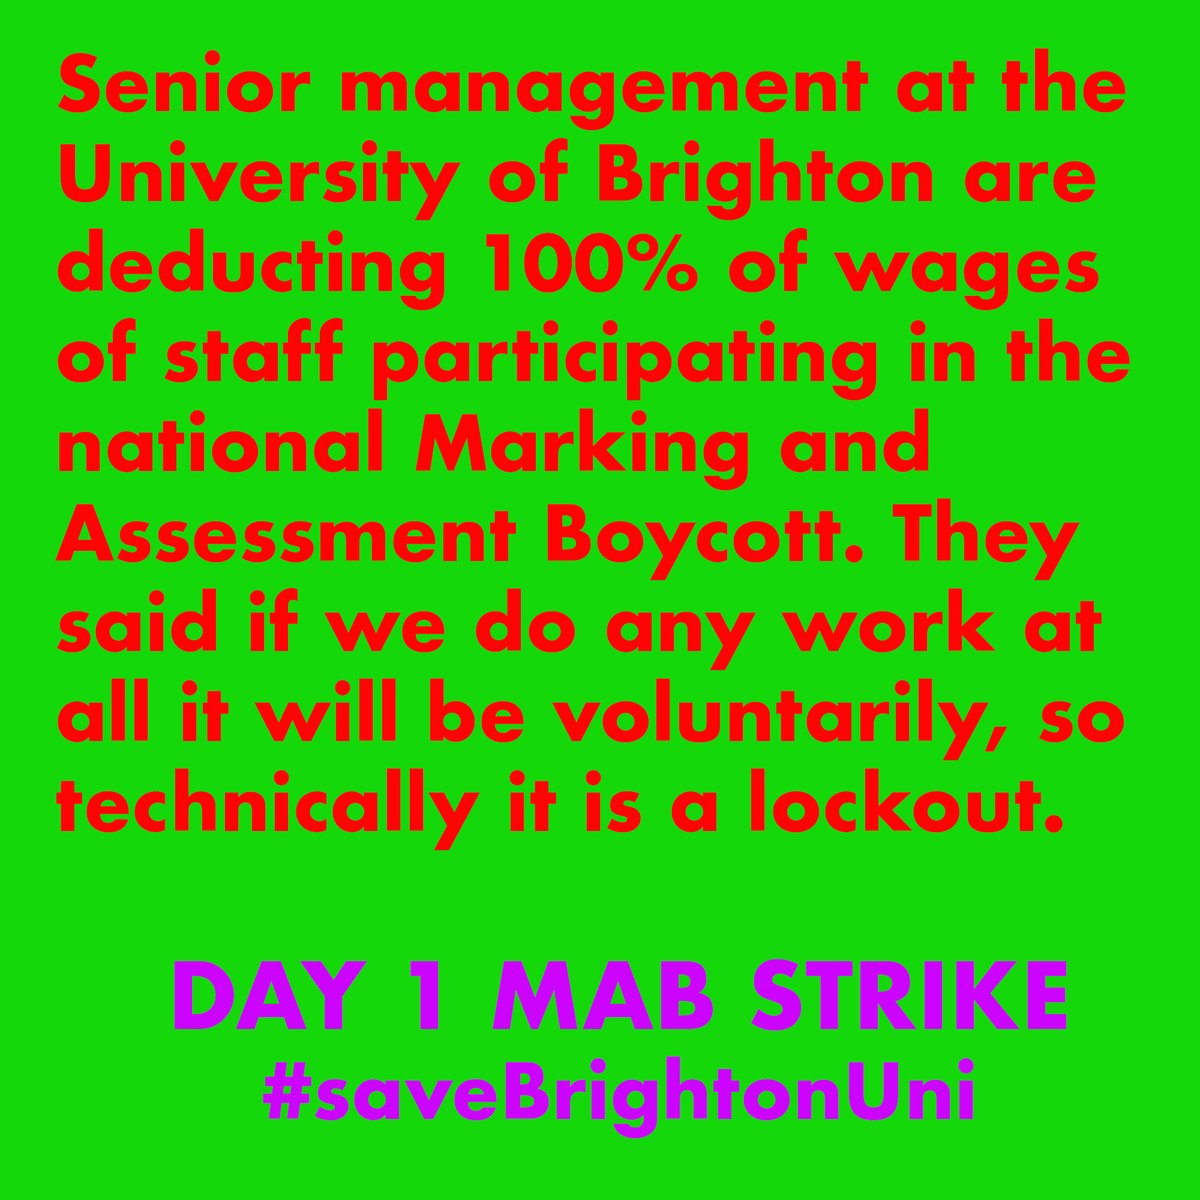 Management @uniofbrighton are deducting 100% of wages of staff participating in the national Marking and Assessment Boycott. They said if we do any work at all it will be voluntarily, so technically it is a lockout.  #UoBSolidarity #BrightonUniStrike #UCU #MAB